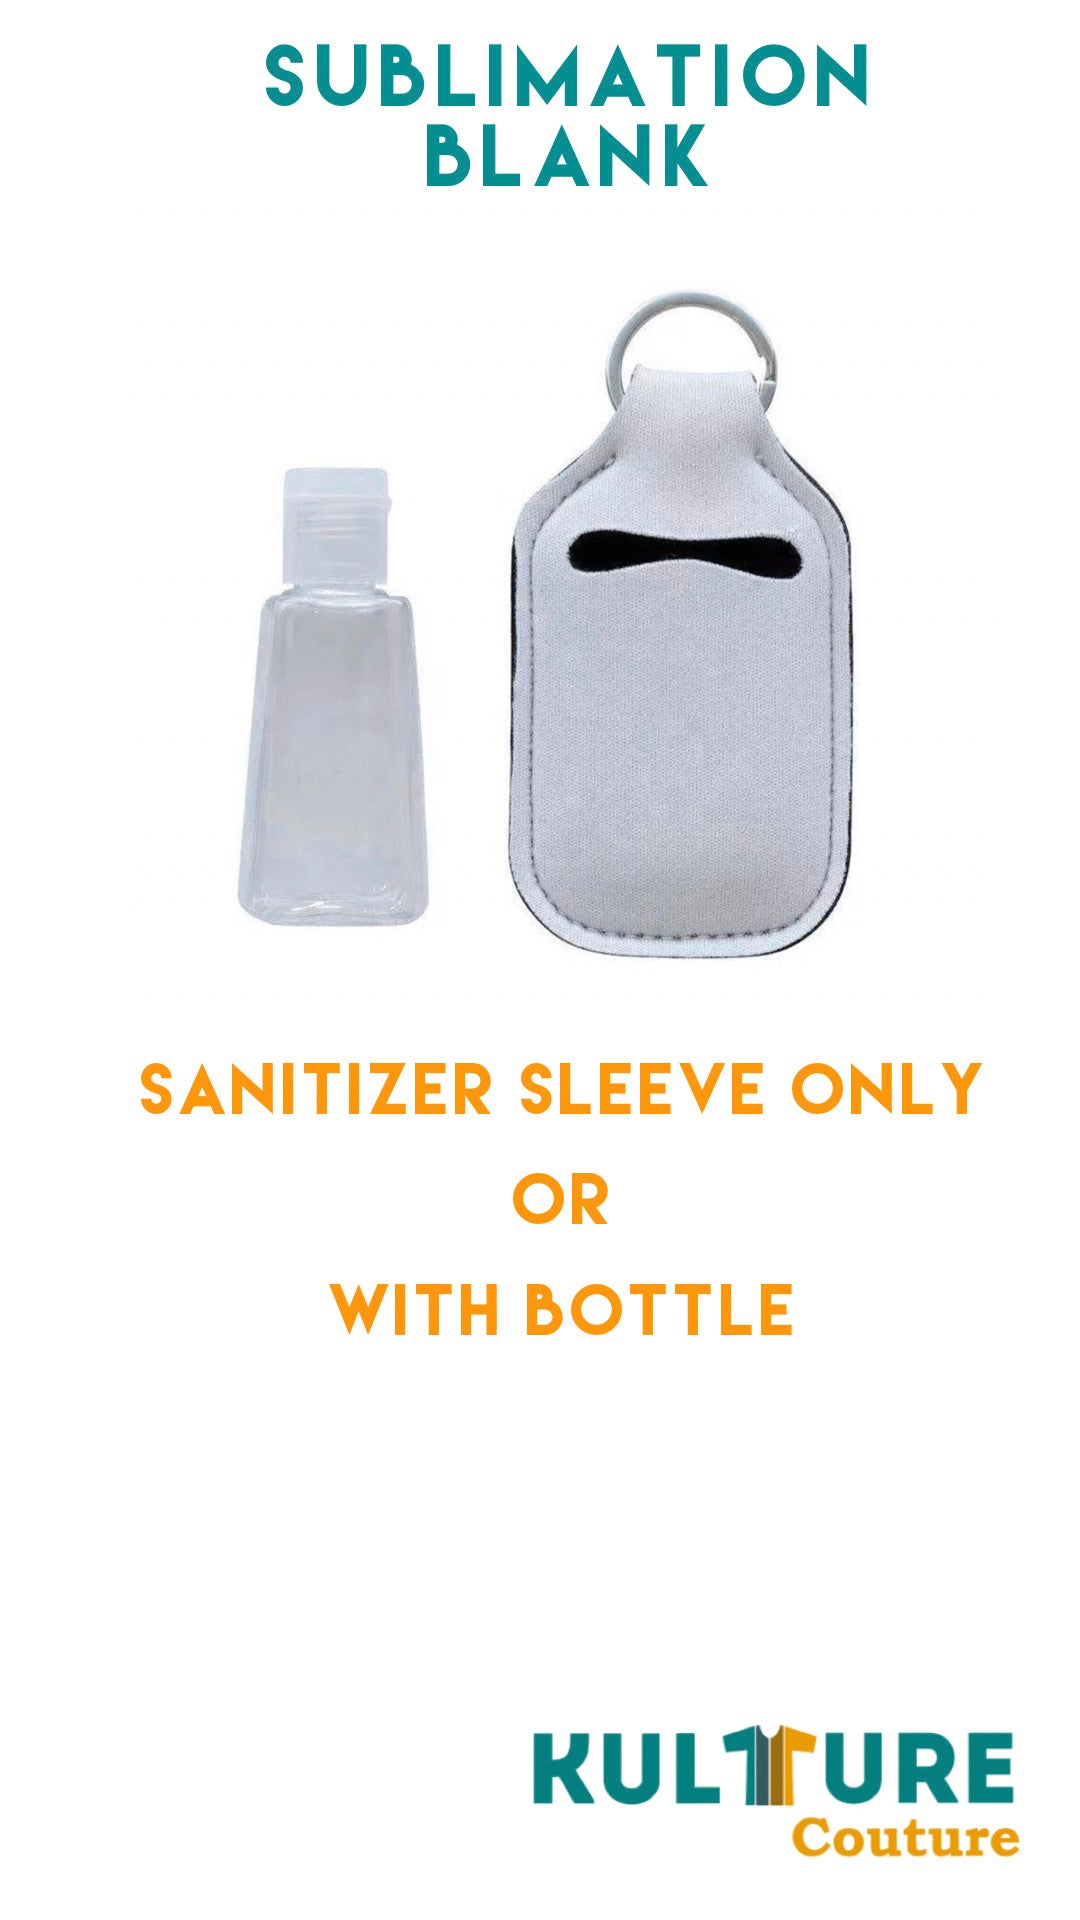 Blank Sublimation Hand Sanitizer Carrying Sleeve - KULTURE PRINT HOUSE